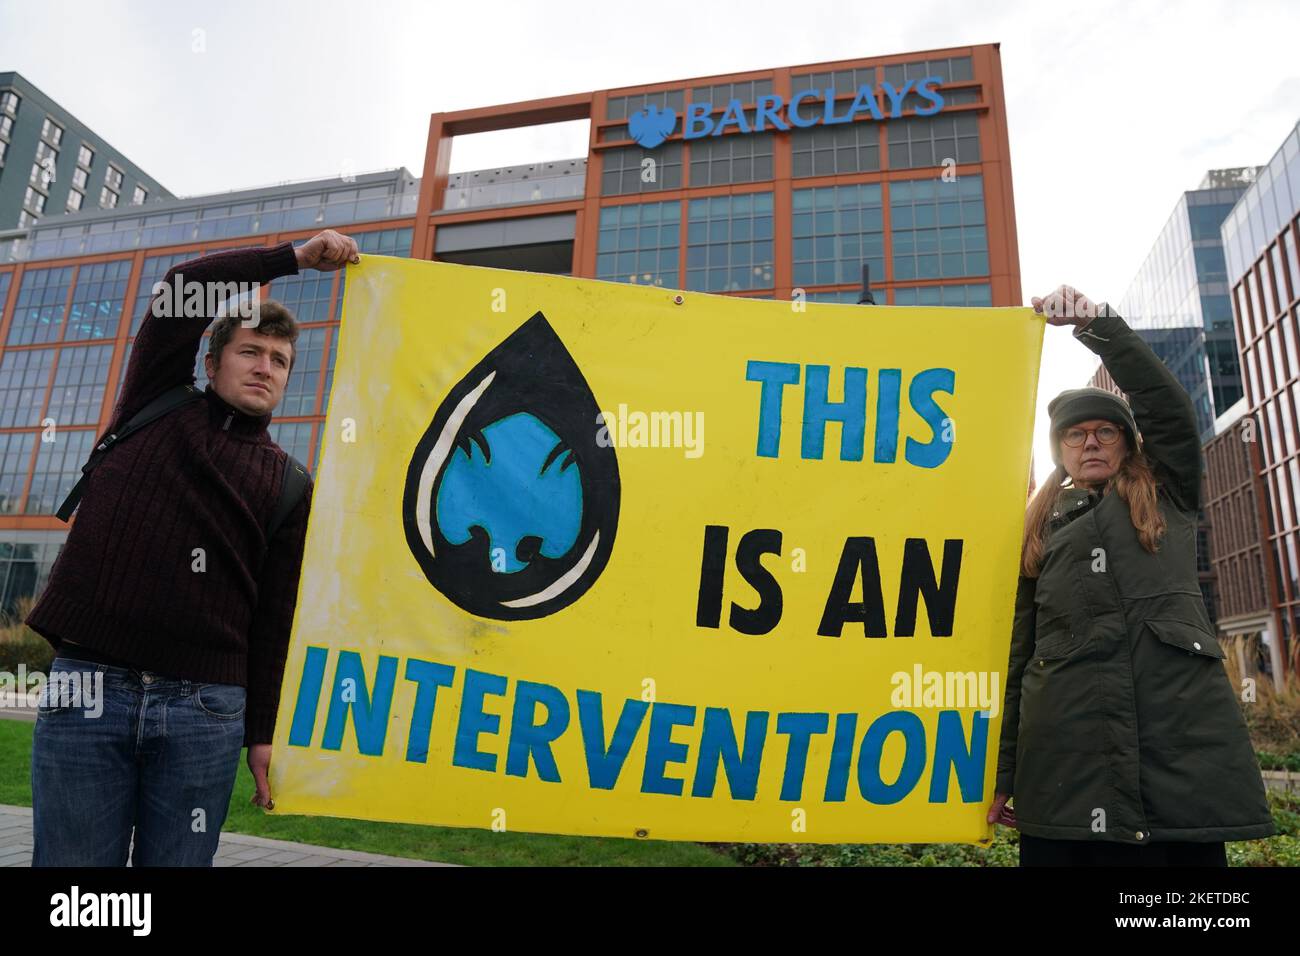 Members from Extinction Rebellion Scotland protesting outside Barclays Clyde Place Quay branch in Glasgow as they demand Barclays cut its ties with fossil fuel firms. The protest is part of Extinction Rebellion and Money Rebellion's UK-wide Better without Barclays campaign of disruption. Picture date: Monday November 14, 2022. Stock Photo